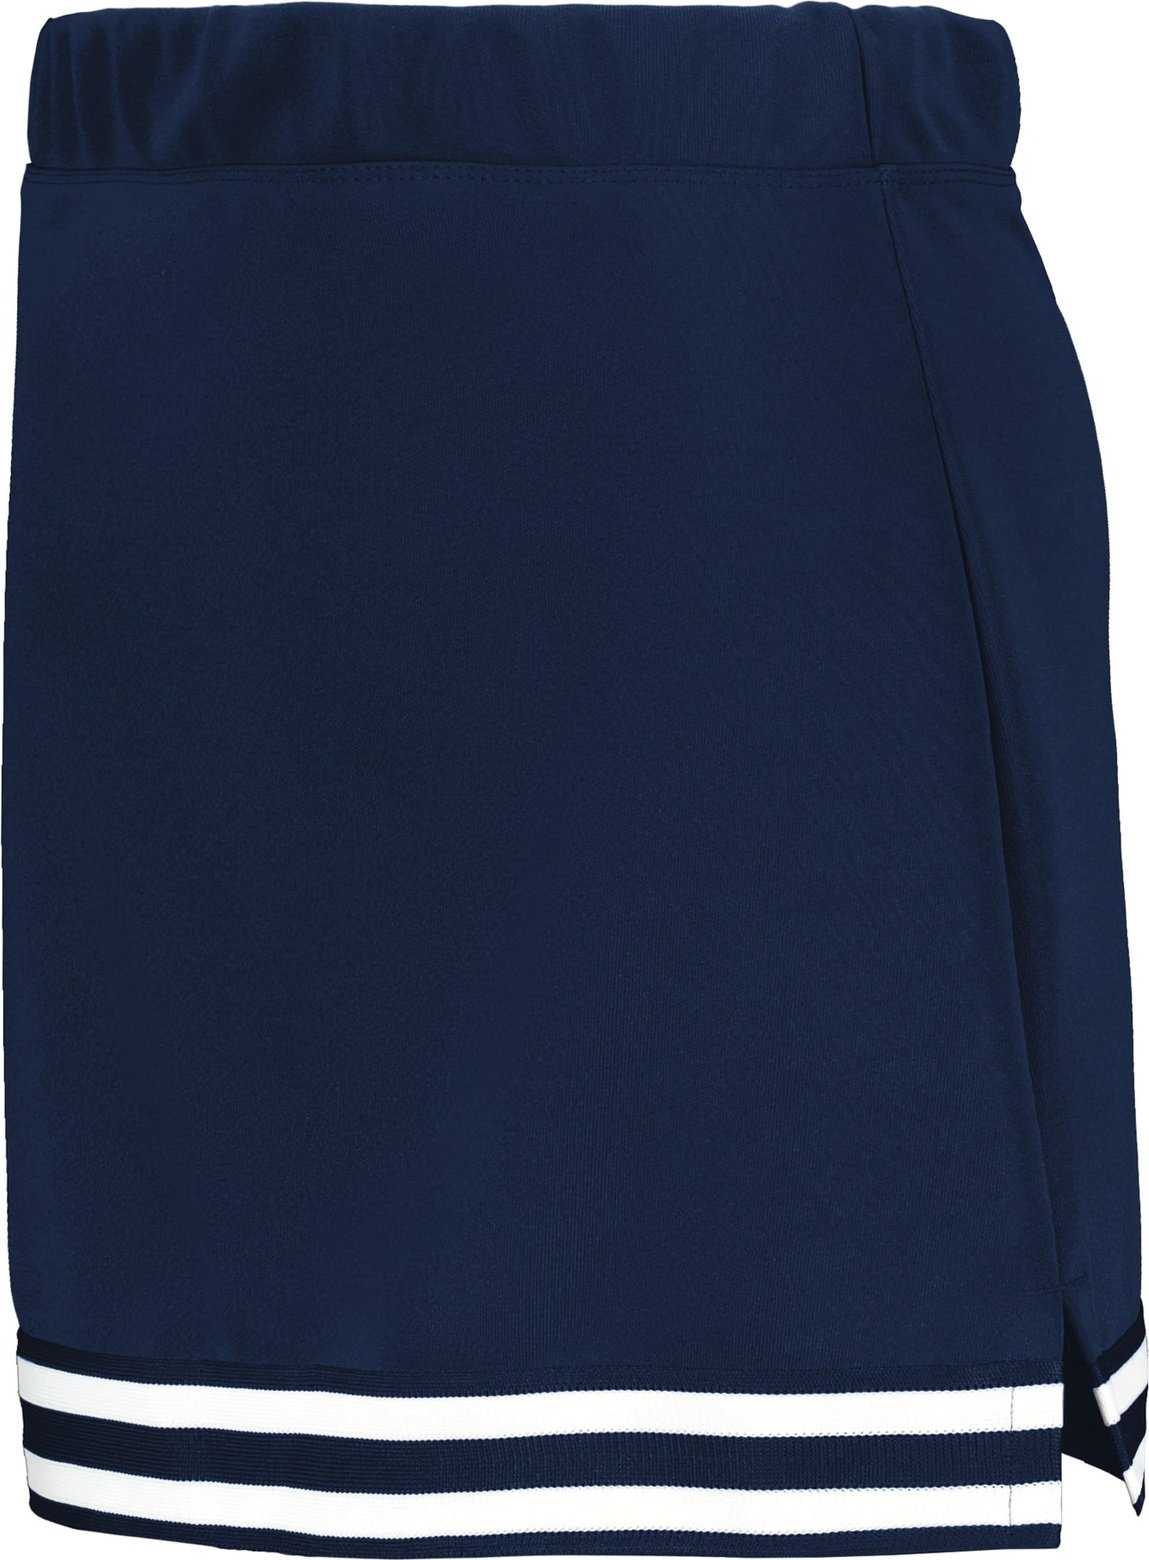 Augusta 6925 Ladies Cheer Squad Skirt - Navy Navy White - HIT a Double